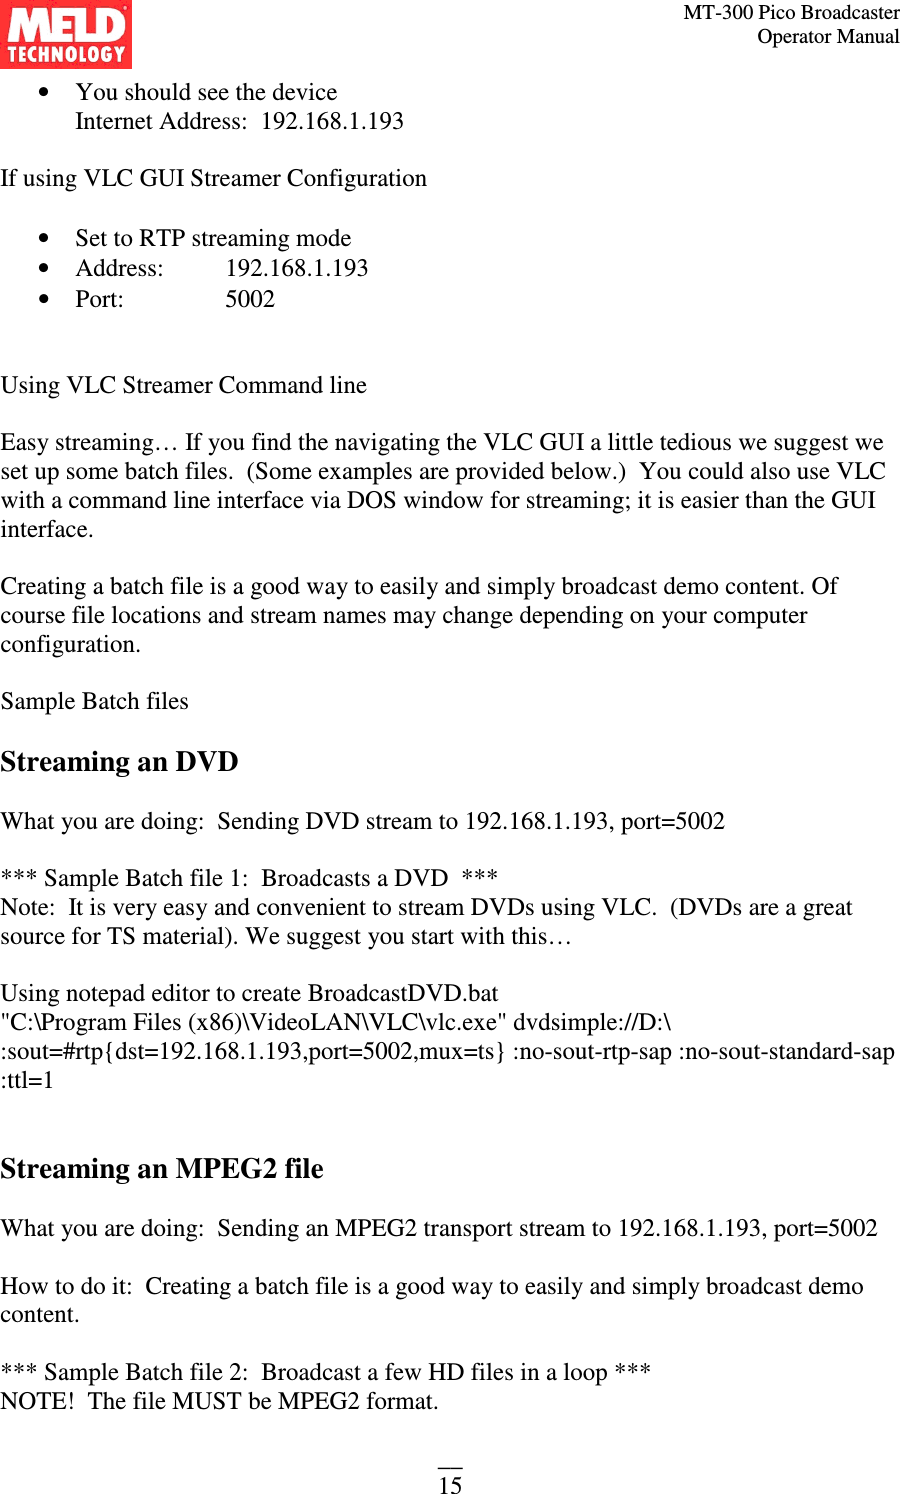 MT-300 Pico Broadcaster                                                                                                                                             Operator Manual __ 15 • You should see the device  Internet Address:  192.168.1.193  If using VLC GUI Streamer Configuration  • Set to RTP streaming mode • Address:   192.168.1.193 • Port:    5002   Using VLC Streamer Command line  Easy streaming… If you find the navigating the VLC GUI a little tedious we suggest we set up some batch files.  (Some examples are provided below.)  You could also use VLC with a command line interface via DOS window for streaming; it is easier than the GUI interface.  Creating a batch file is a good way to easily and simply broadcast demo content. Of course file locations and stream names may change depending on your computer configuration.  Sample Batch files  Streaming an DVD  What you are doing:  Sending DVD stream to 192.168.1.193, port=5002  *** Sample Batch file 1:  Broadcasts a DVD  *** Note:  It is very easy and convenient to stream DVDs using VLC.  (DVDs are a great source for TS material). We suggest you start with this…  Using notepad editor to create BroadcastDVD.bat &quot;C:\Program Files (x86)\VideoLAN\VLC\vlc.exe&quot; dvdsimple://D:\ :sout=#rtp{dst=192.168.1.193,port=5002,mux=ts} :no-sout-rtp-sap :no-sout-standard-sap :ttl=1   Streaming an MPEG2 file  What you are doing:  Sending an MPEG2 transport stream to 192.168.1.193, port=5002  How to do it:  Creating a batch file is a good way to easily and simply broadcast demo content.  *** Sample Batch file 2:  Broadcast a few HD files in a loop ***  NOTE!  The file MUST be MPEG2 format.   